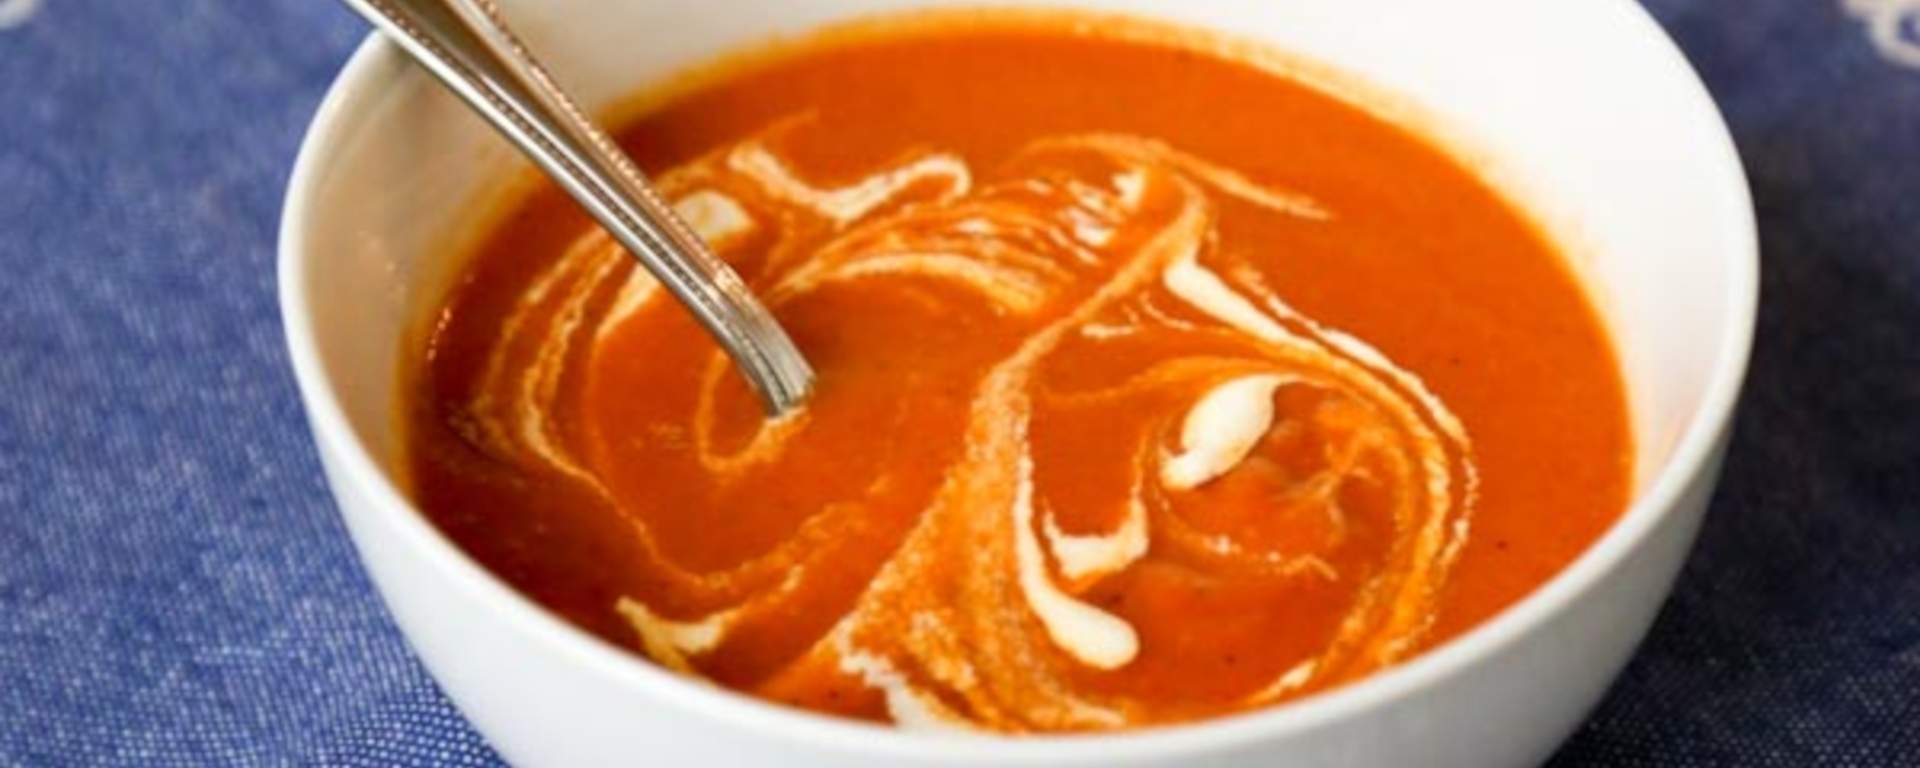 LuvMyRecipe.com - Dairy Free Tomato Soup with Cumin and Red Pepper Chili Flakes Featured